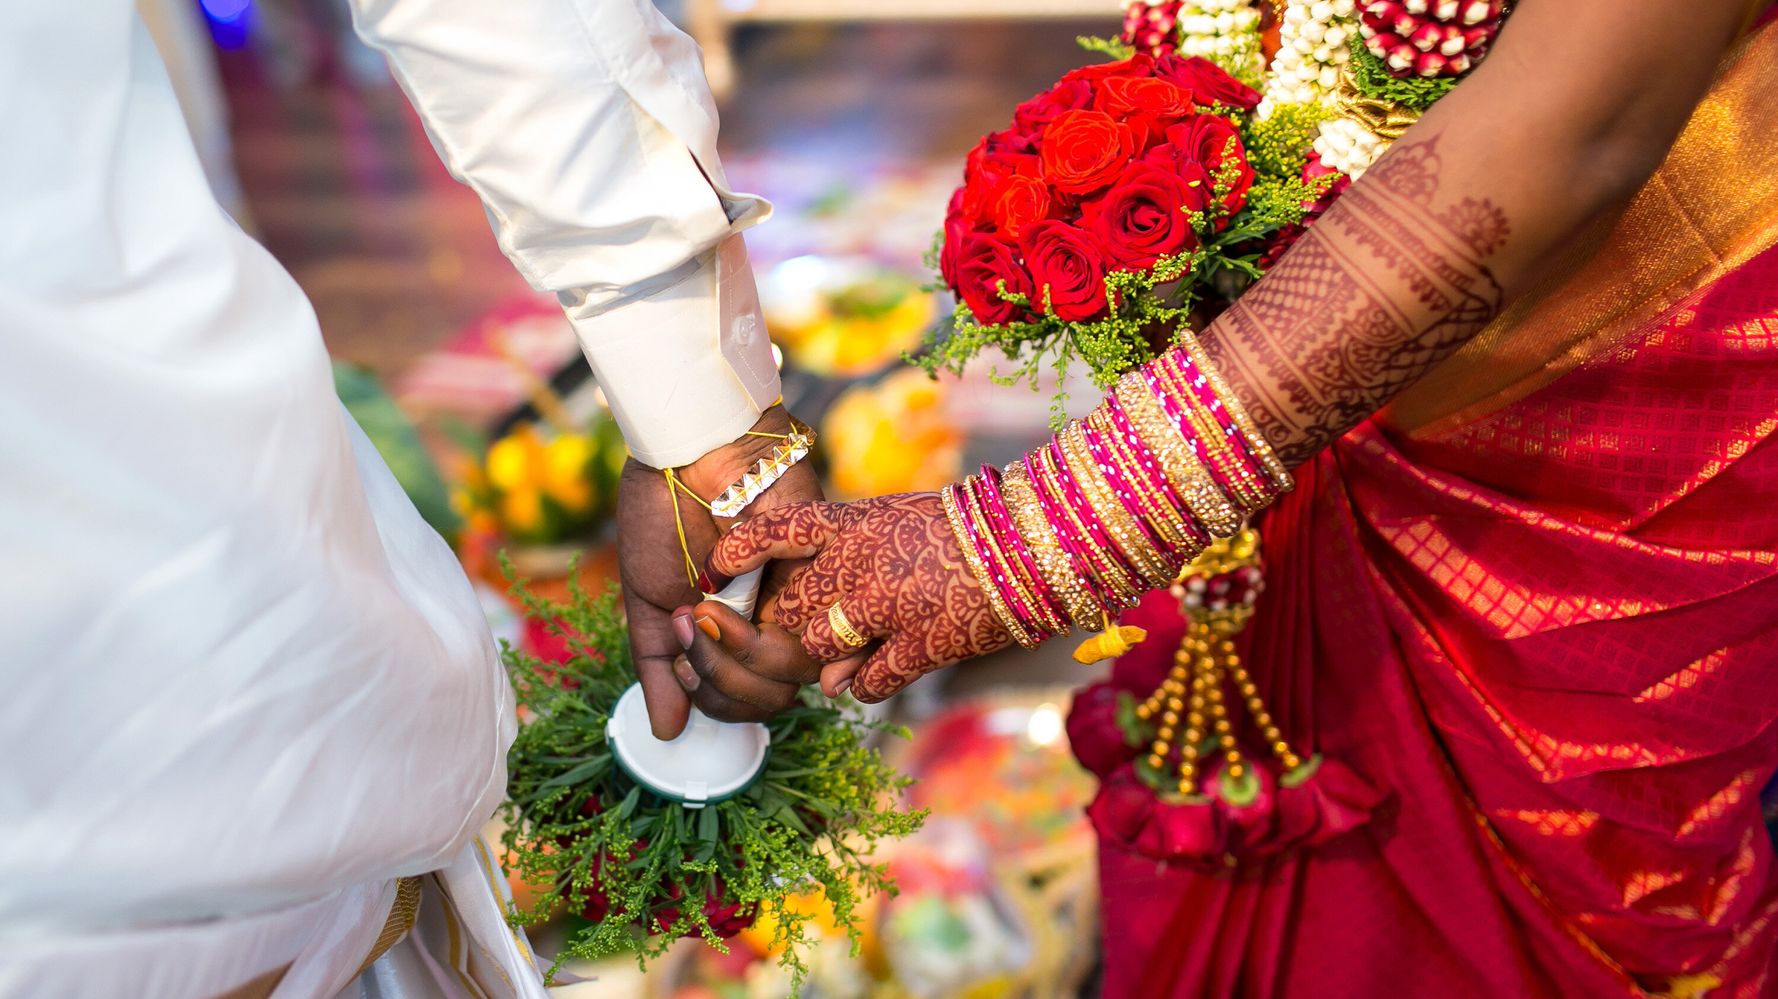 How I Struggled In An Arranged Marriage As An Asexual Man | HuffPost ...